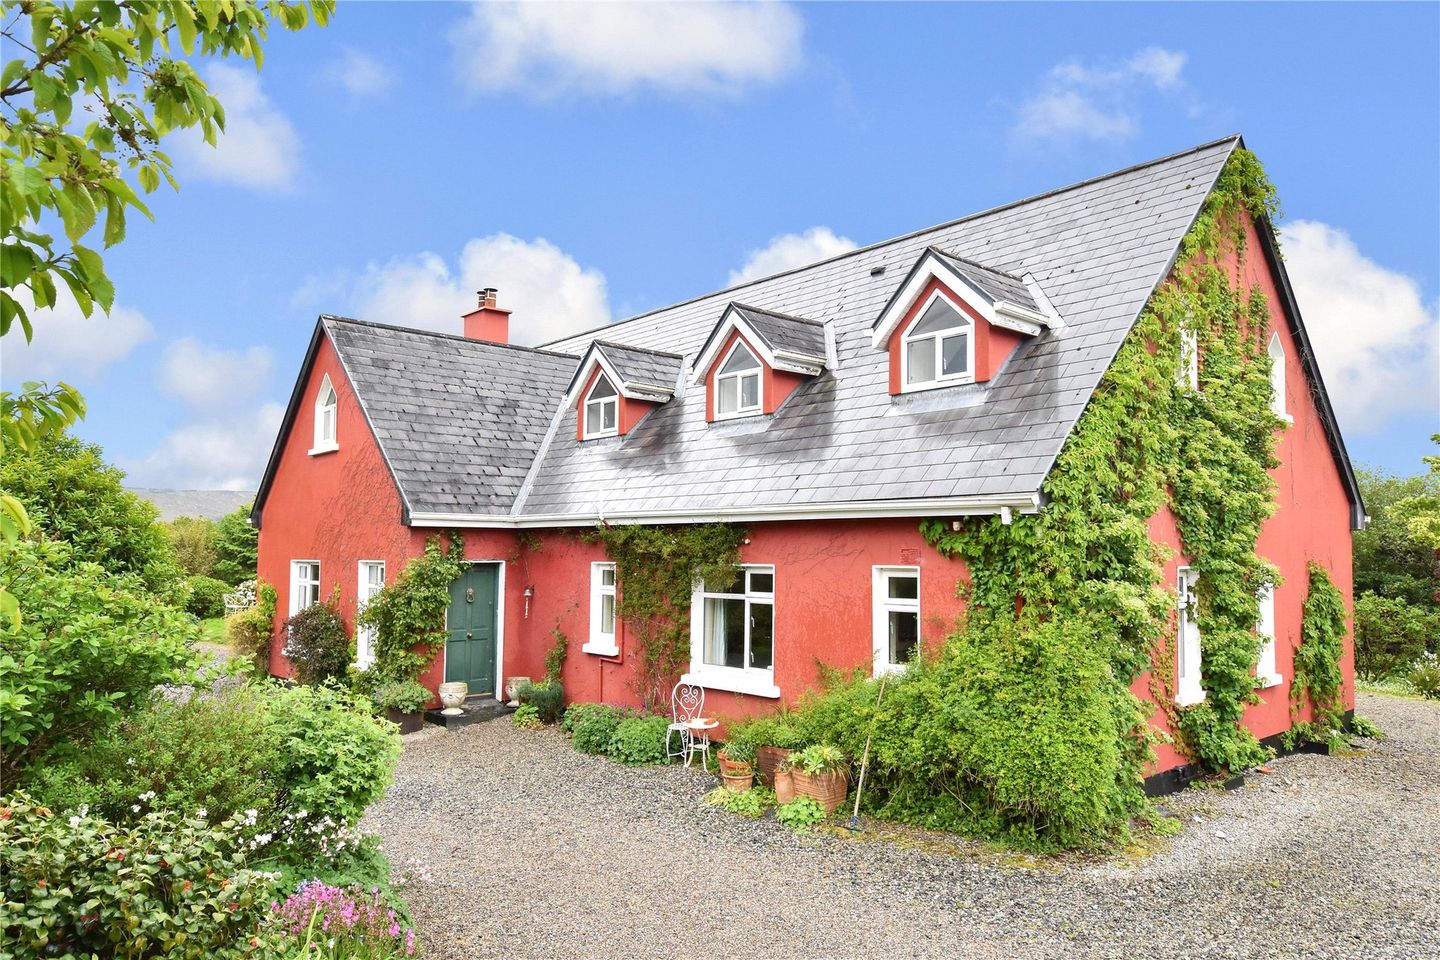 Railway Lodge, Canrawer, Oughterard, Co. Galway, H91RF2H